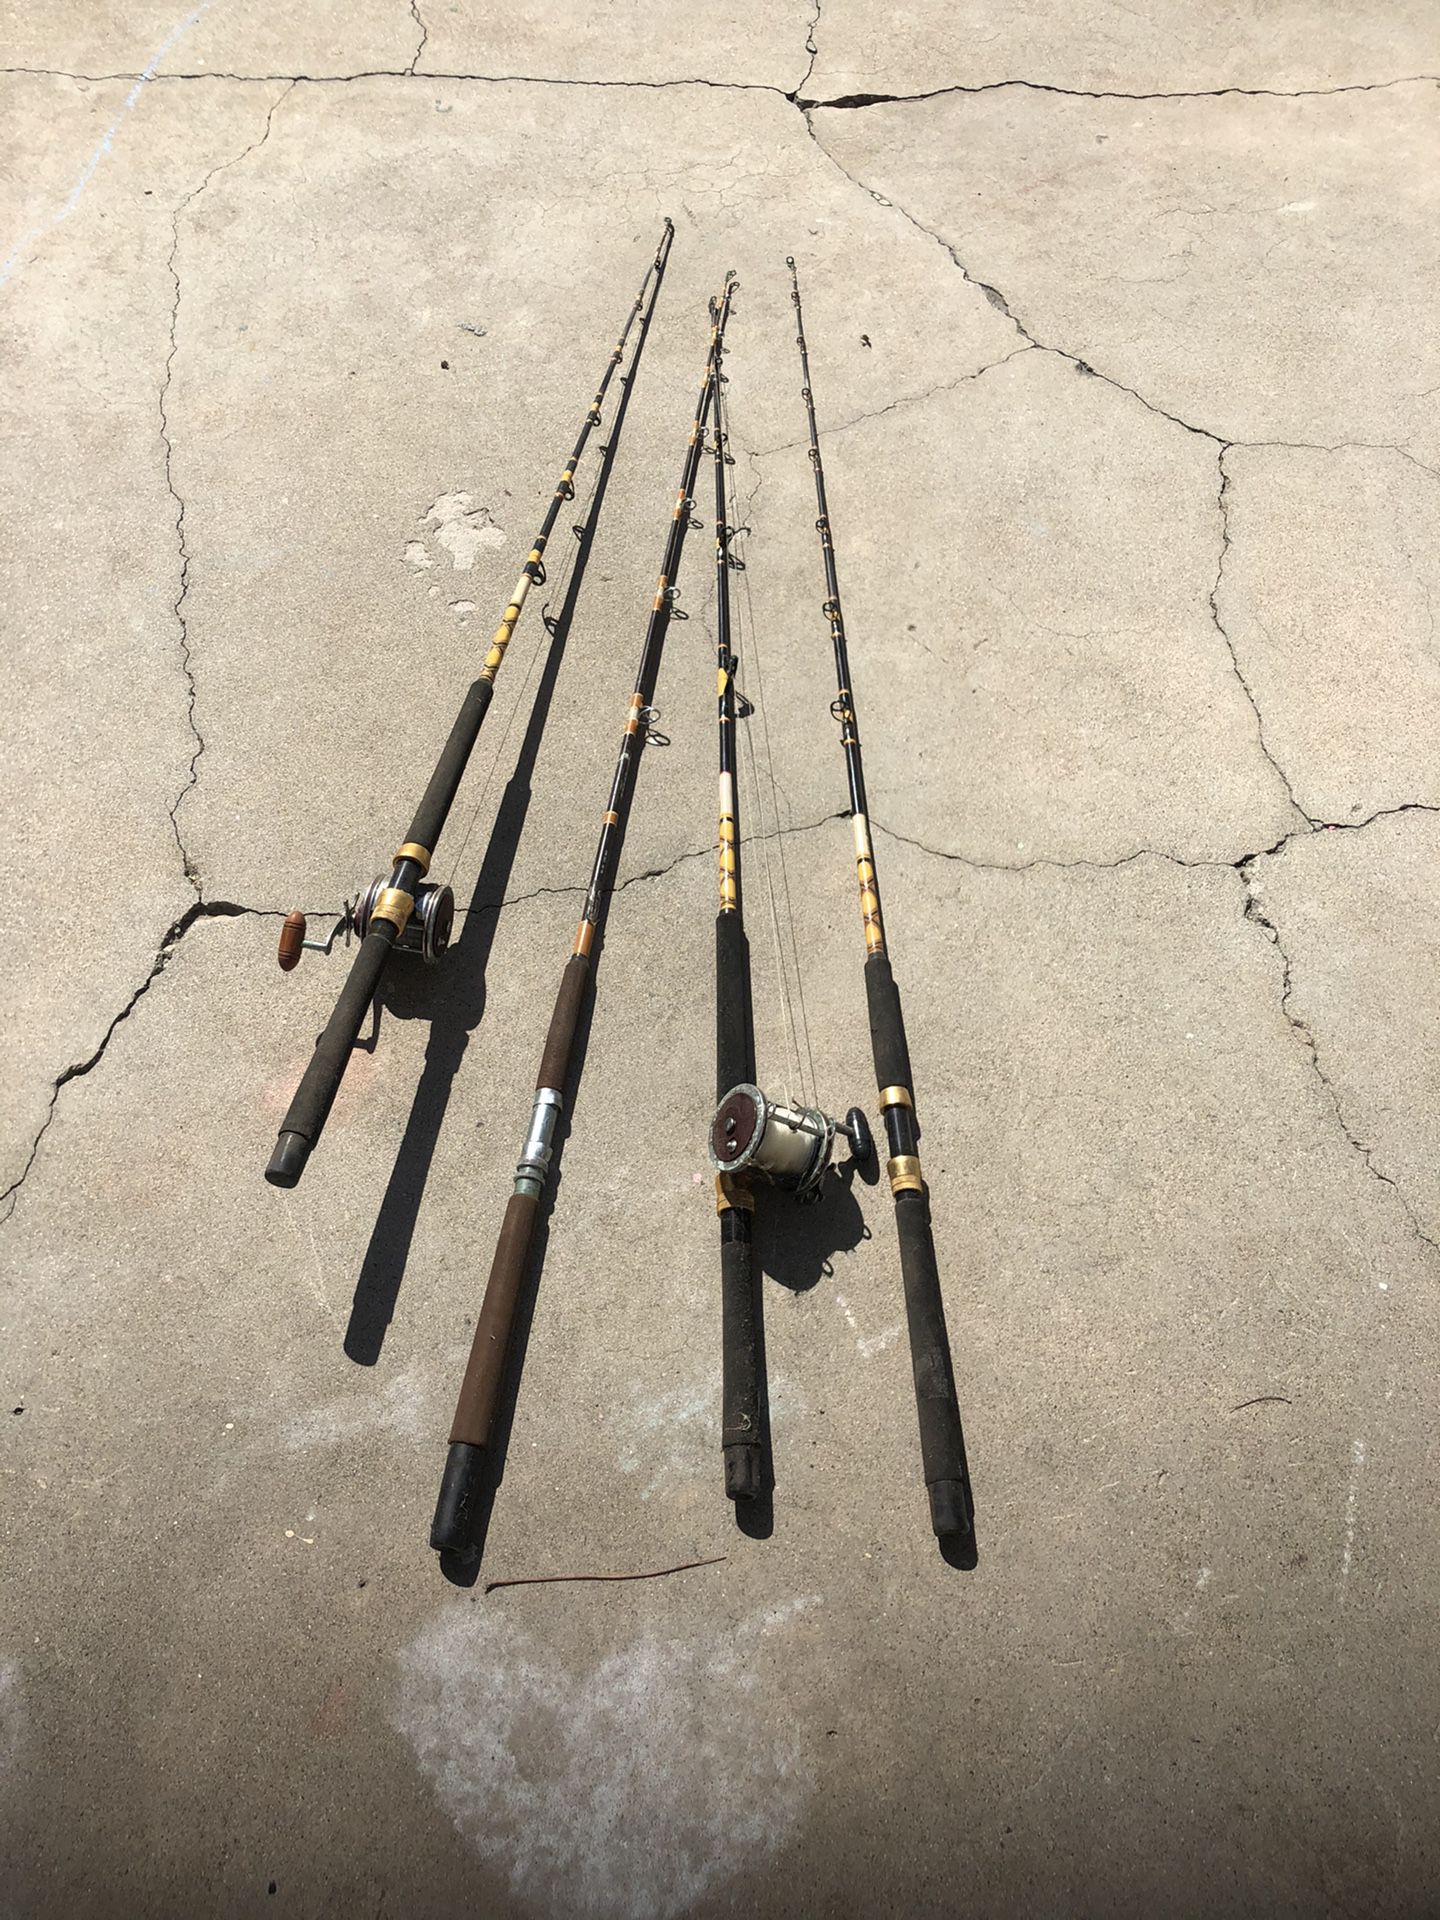 Four fishing rods and two old reels